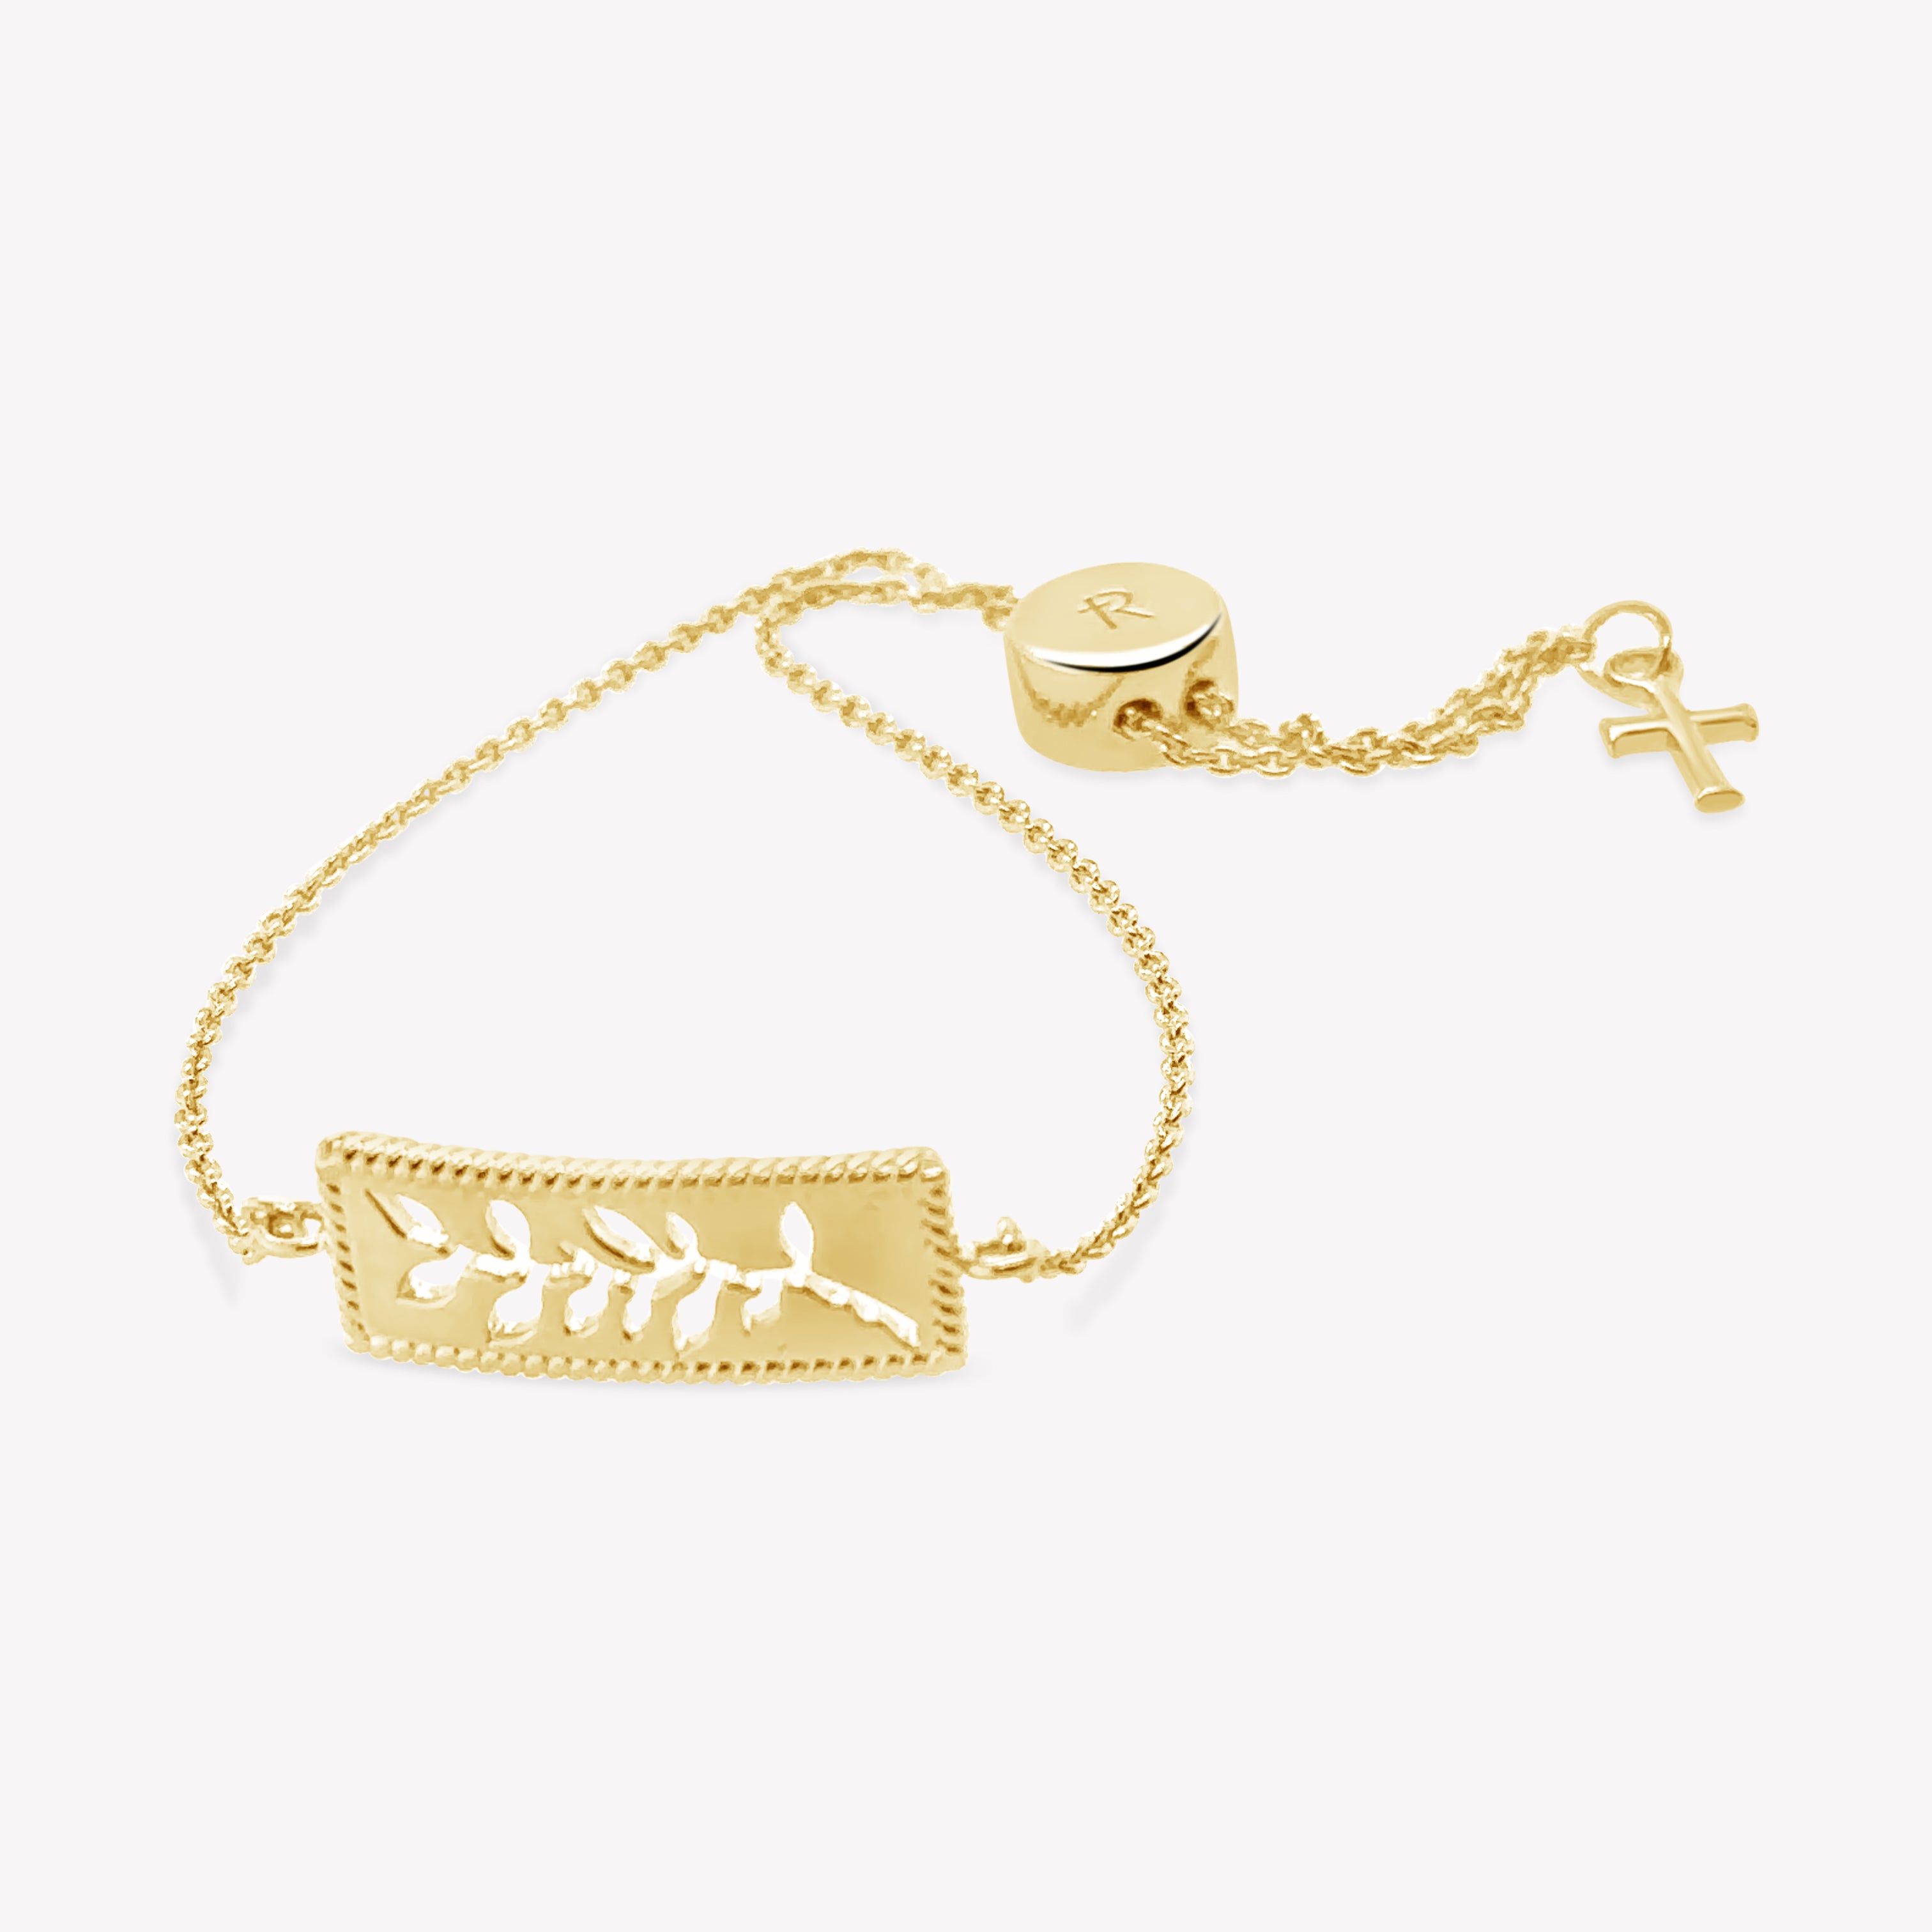 Intricately designed 18K gold vermeil Olive Branch Bracelet with cross tag from the Rooted Collection by Rizen Jewelry.